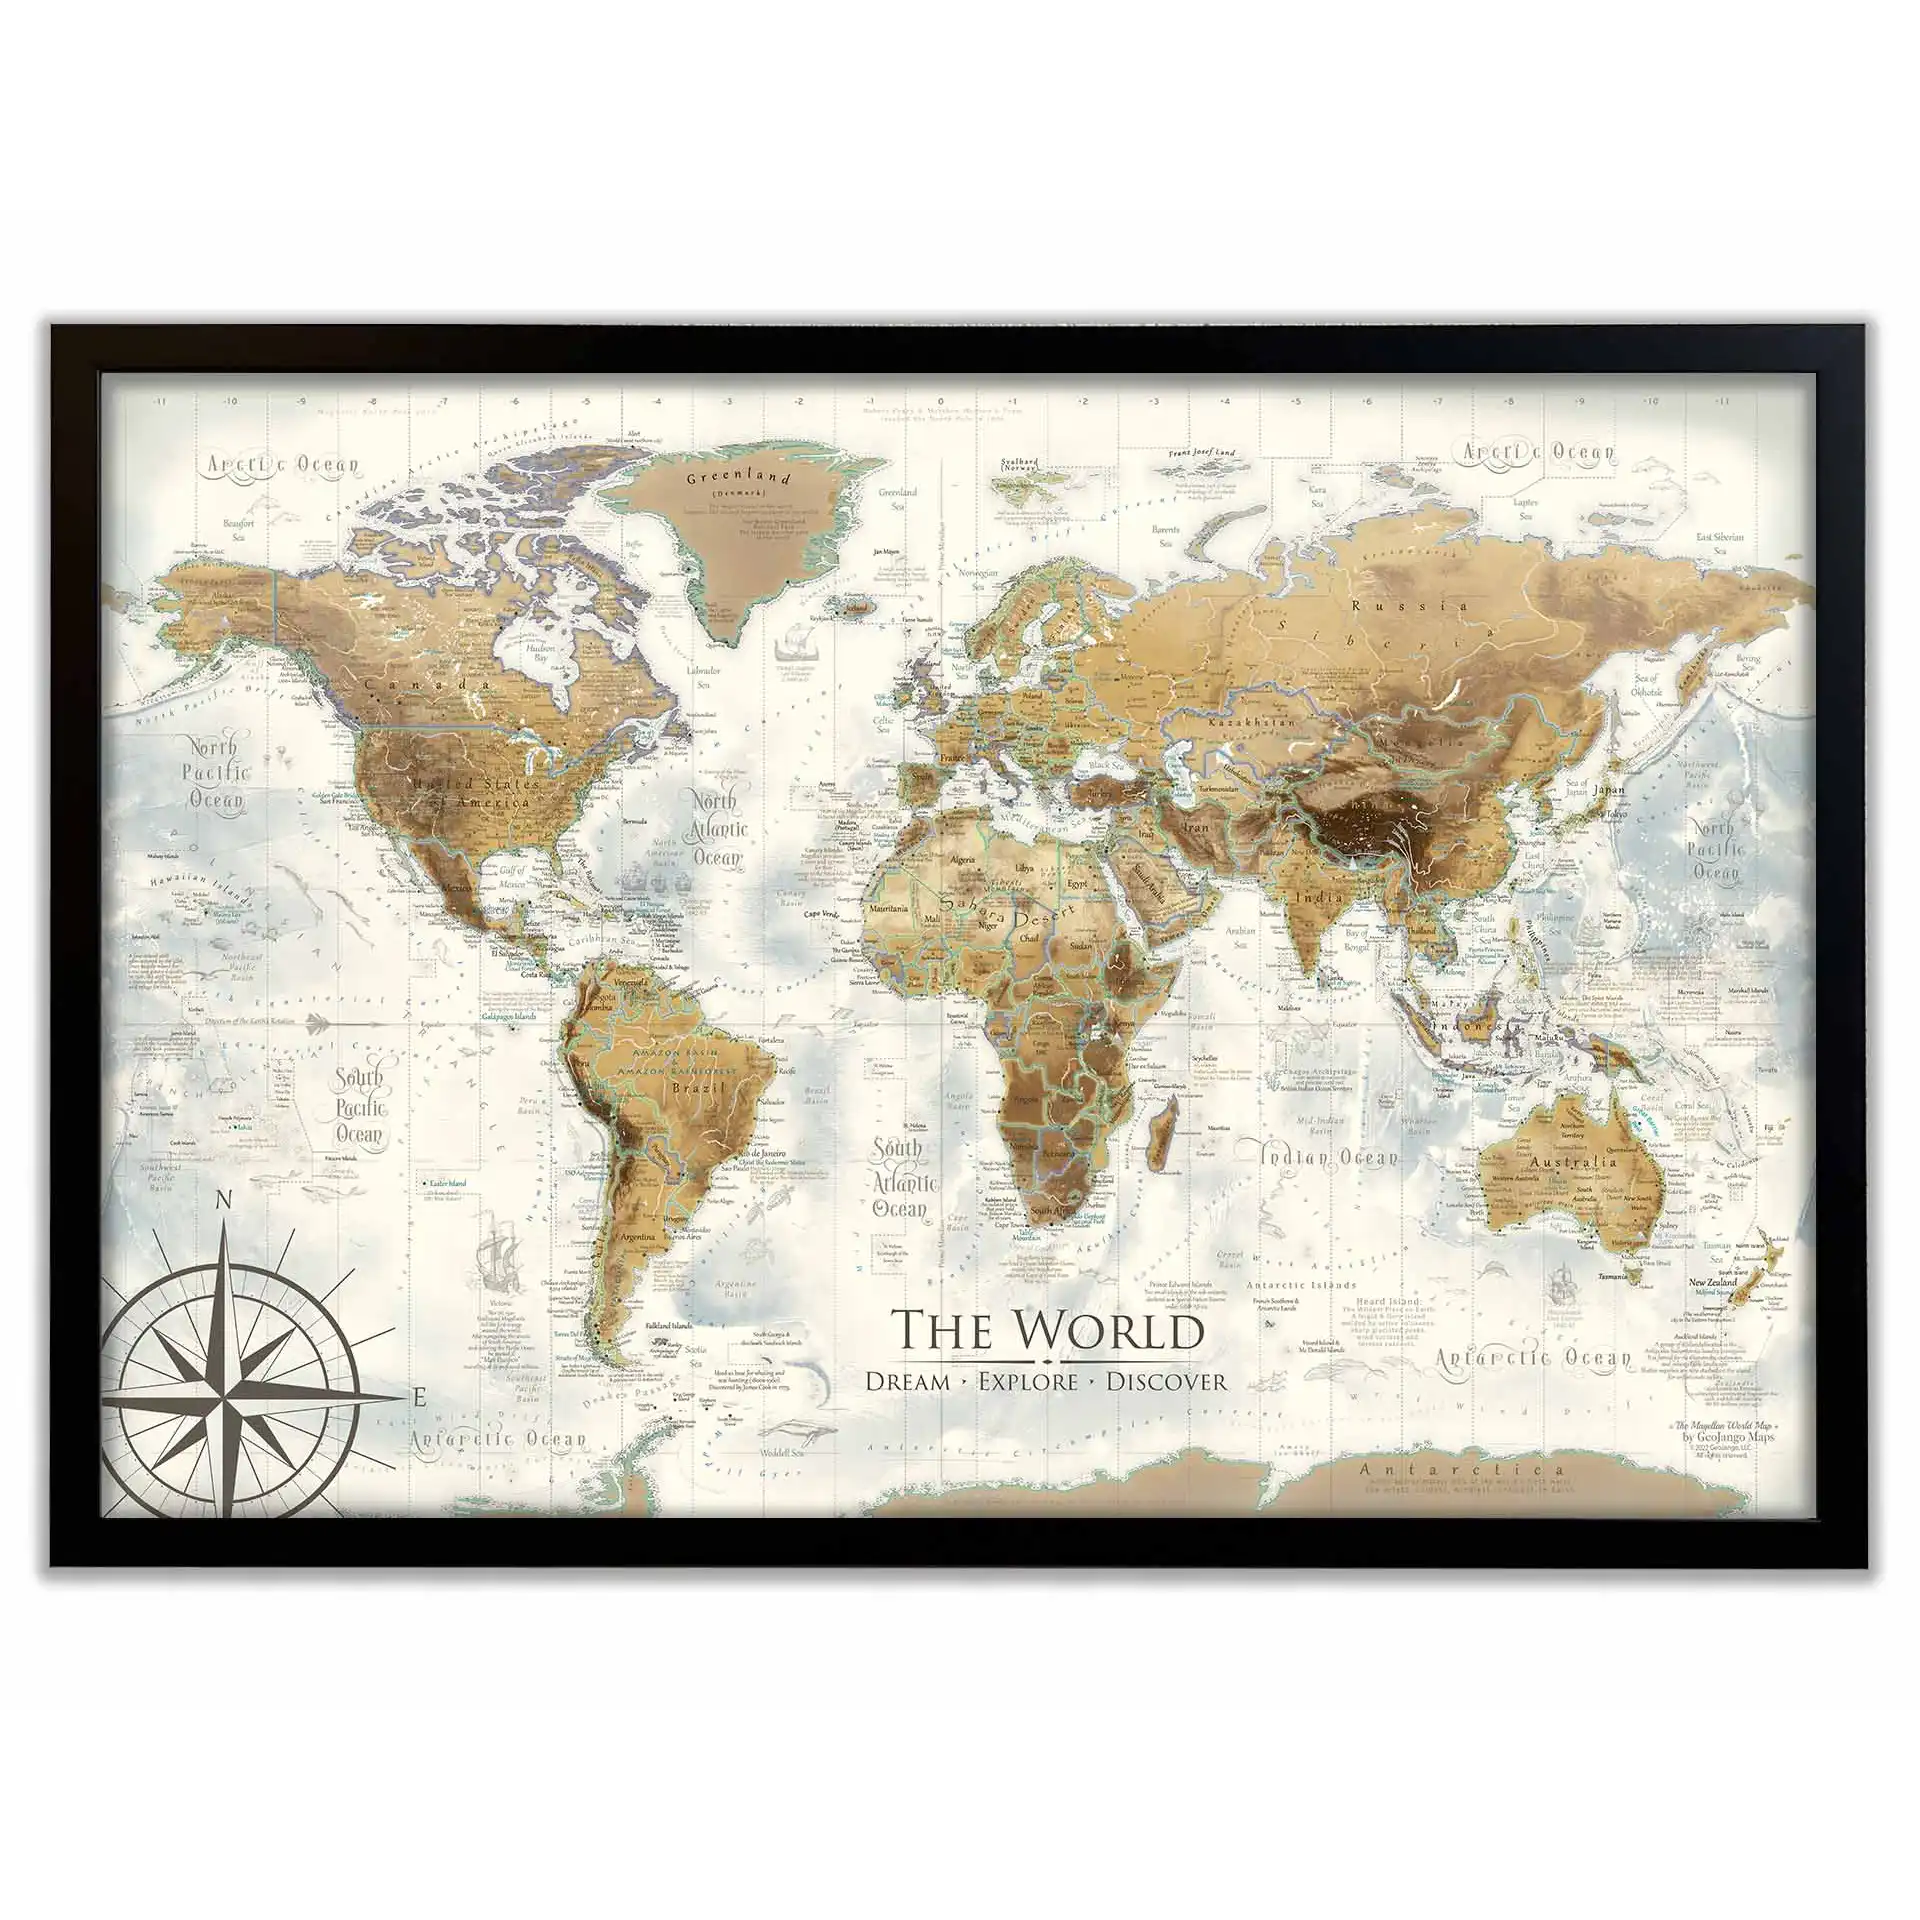 Vintage World Travel Map with Modern Geography